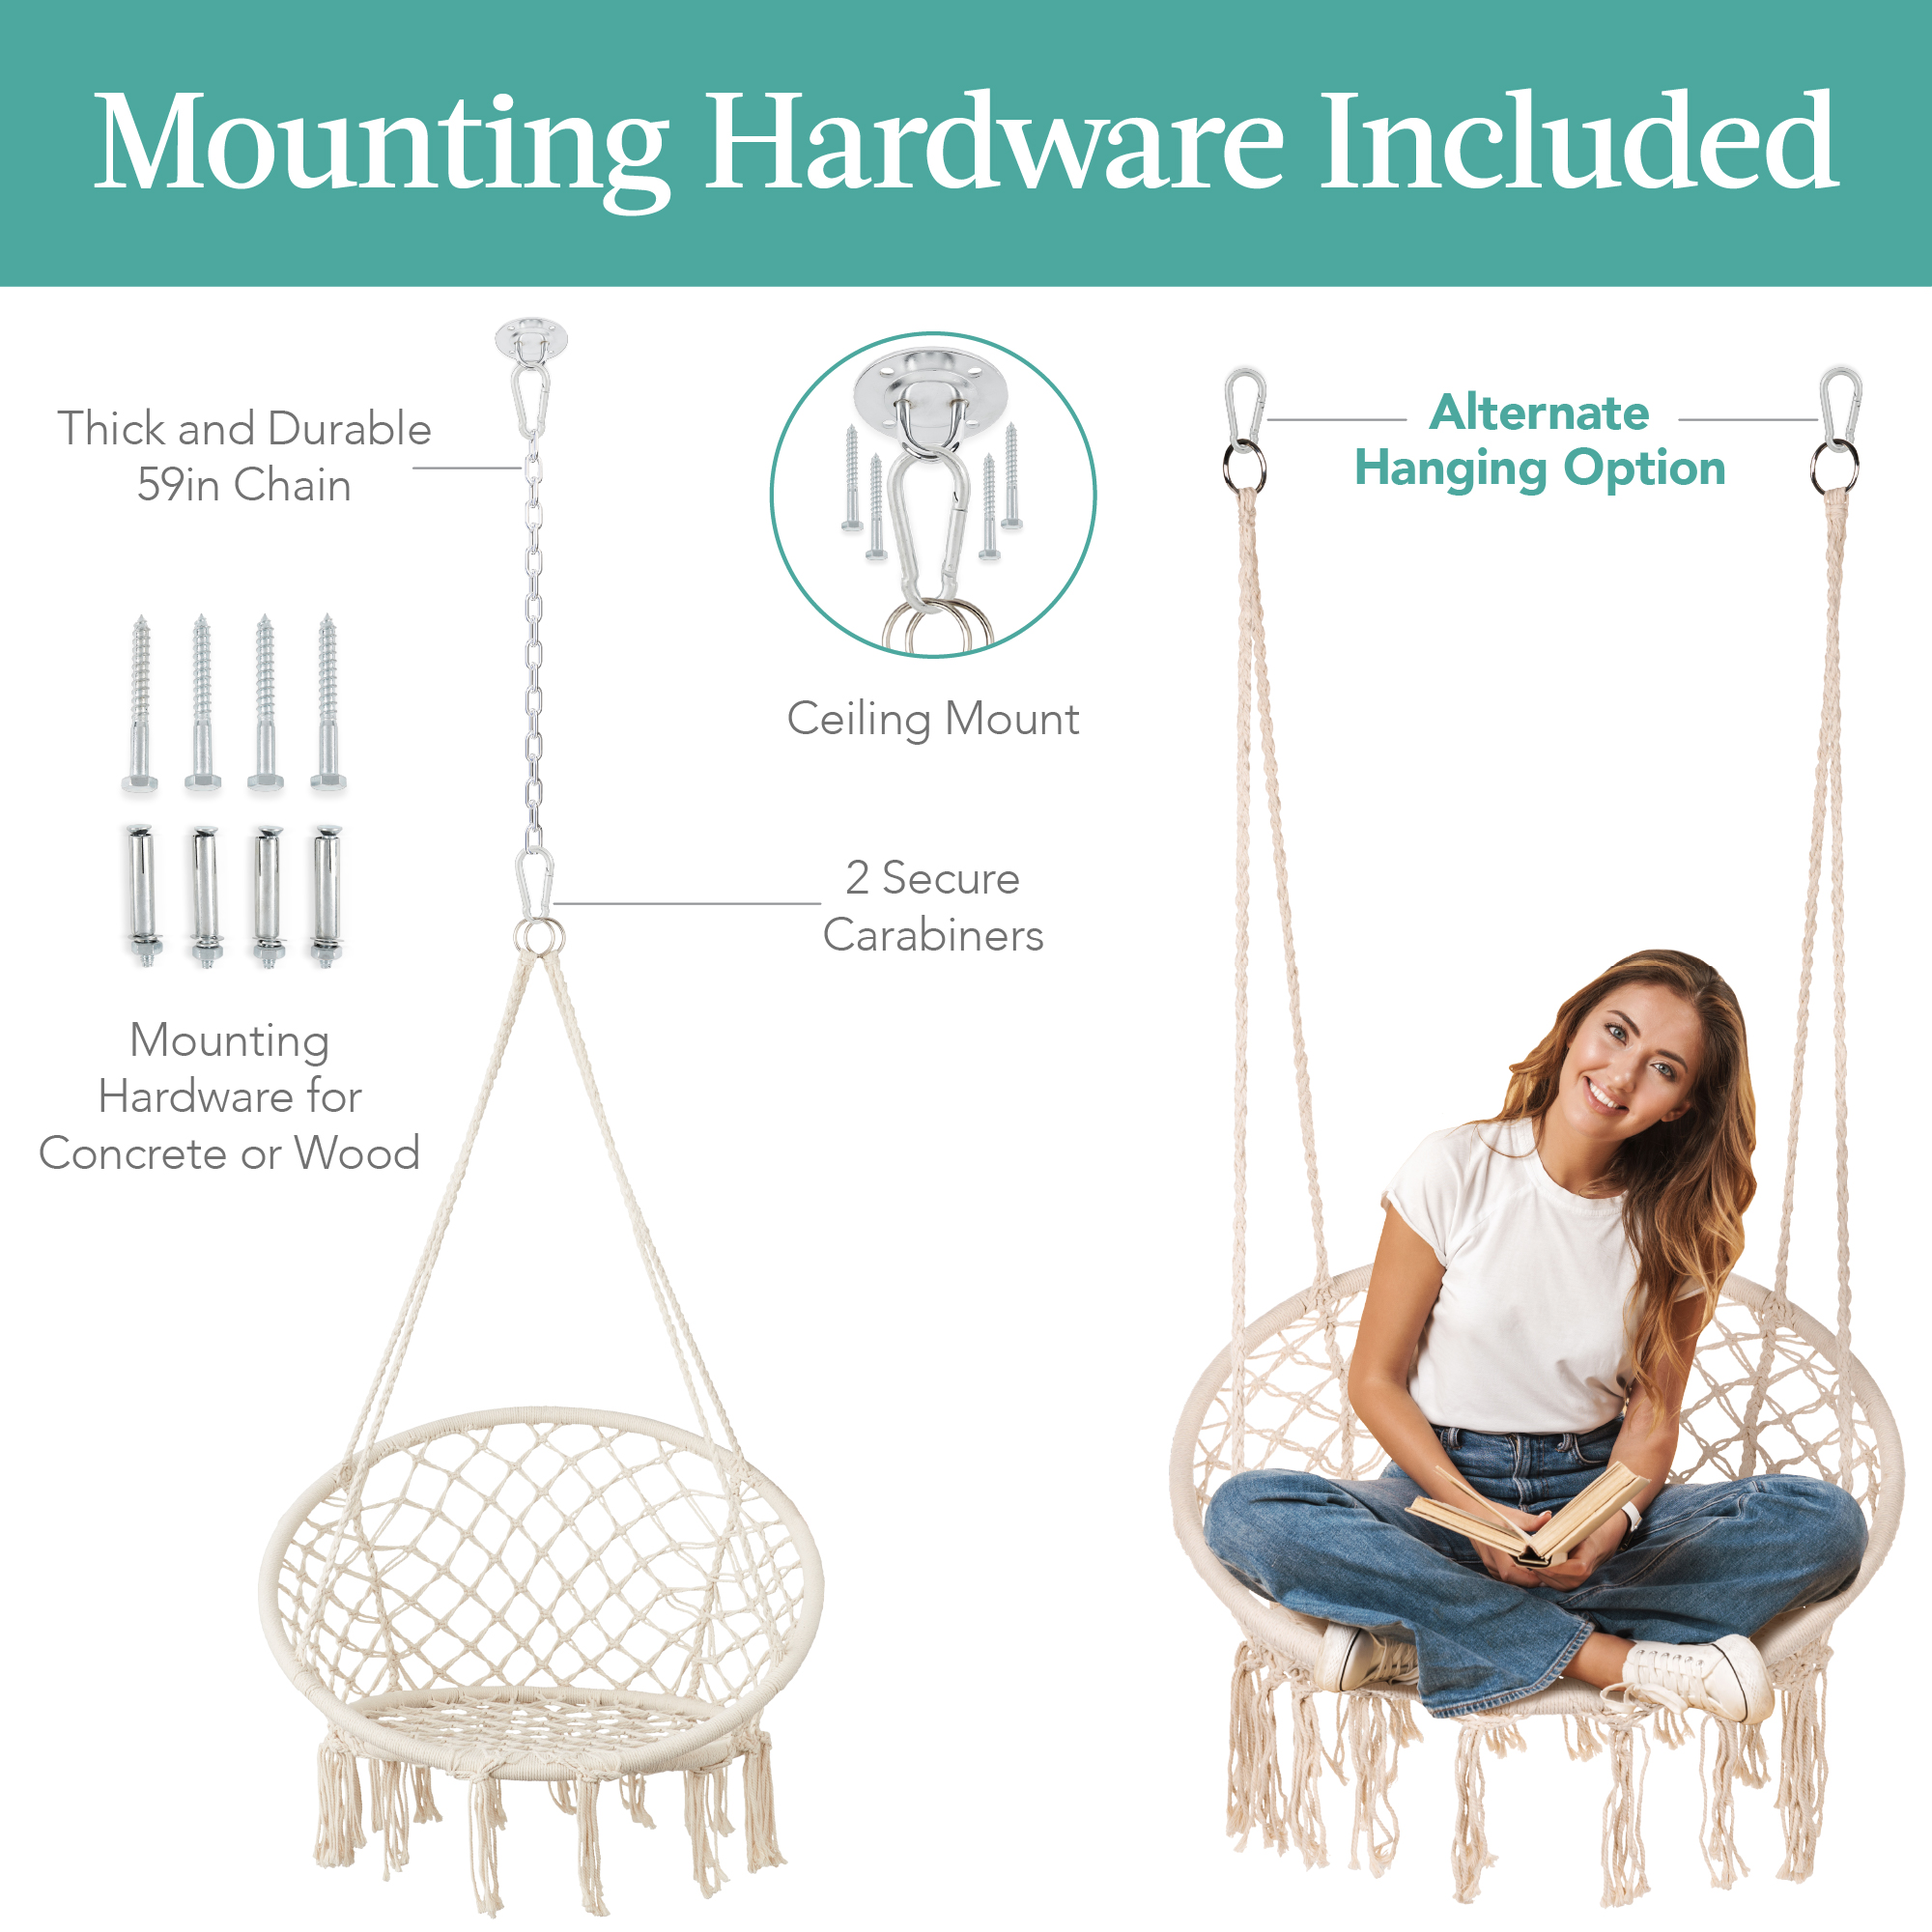 Best Choice Products Macrame Hanging Chair, Handwoven Cotton Hammock Swing w/ Mounting Hardware - Beige - image 5 of 8